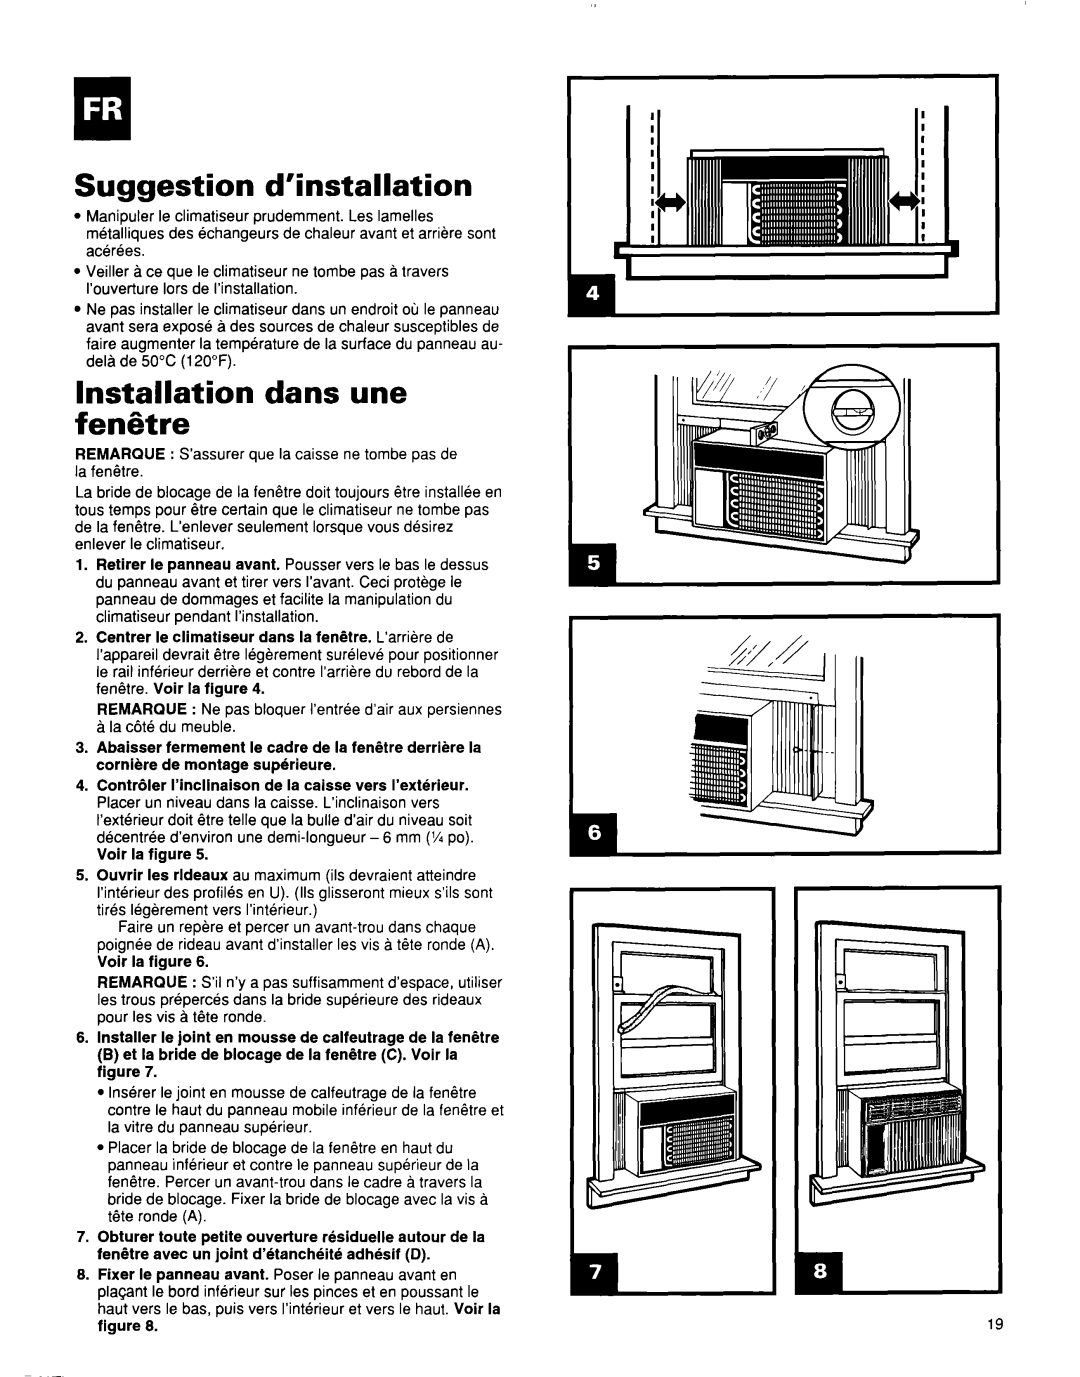 Whirlpool BHAC0600BS0 manual Suggestion d’installation, Installation dans une fenGtre 